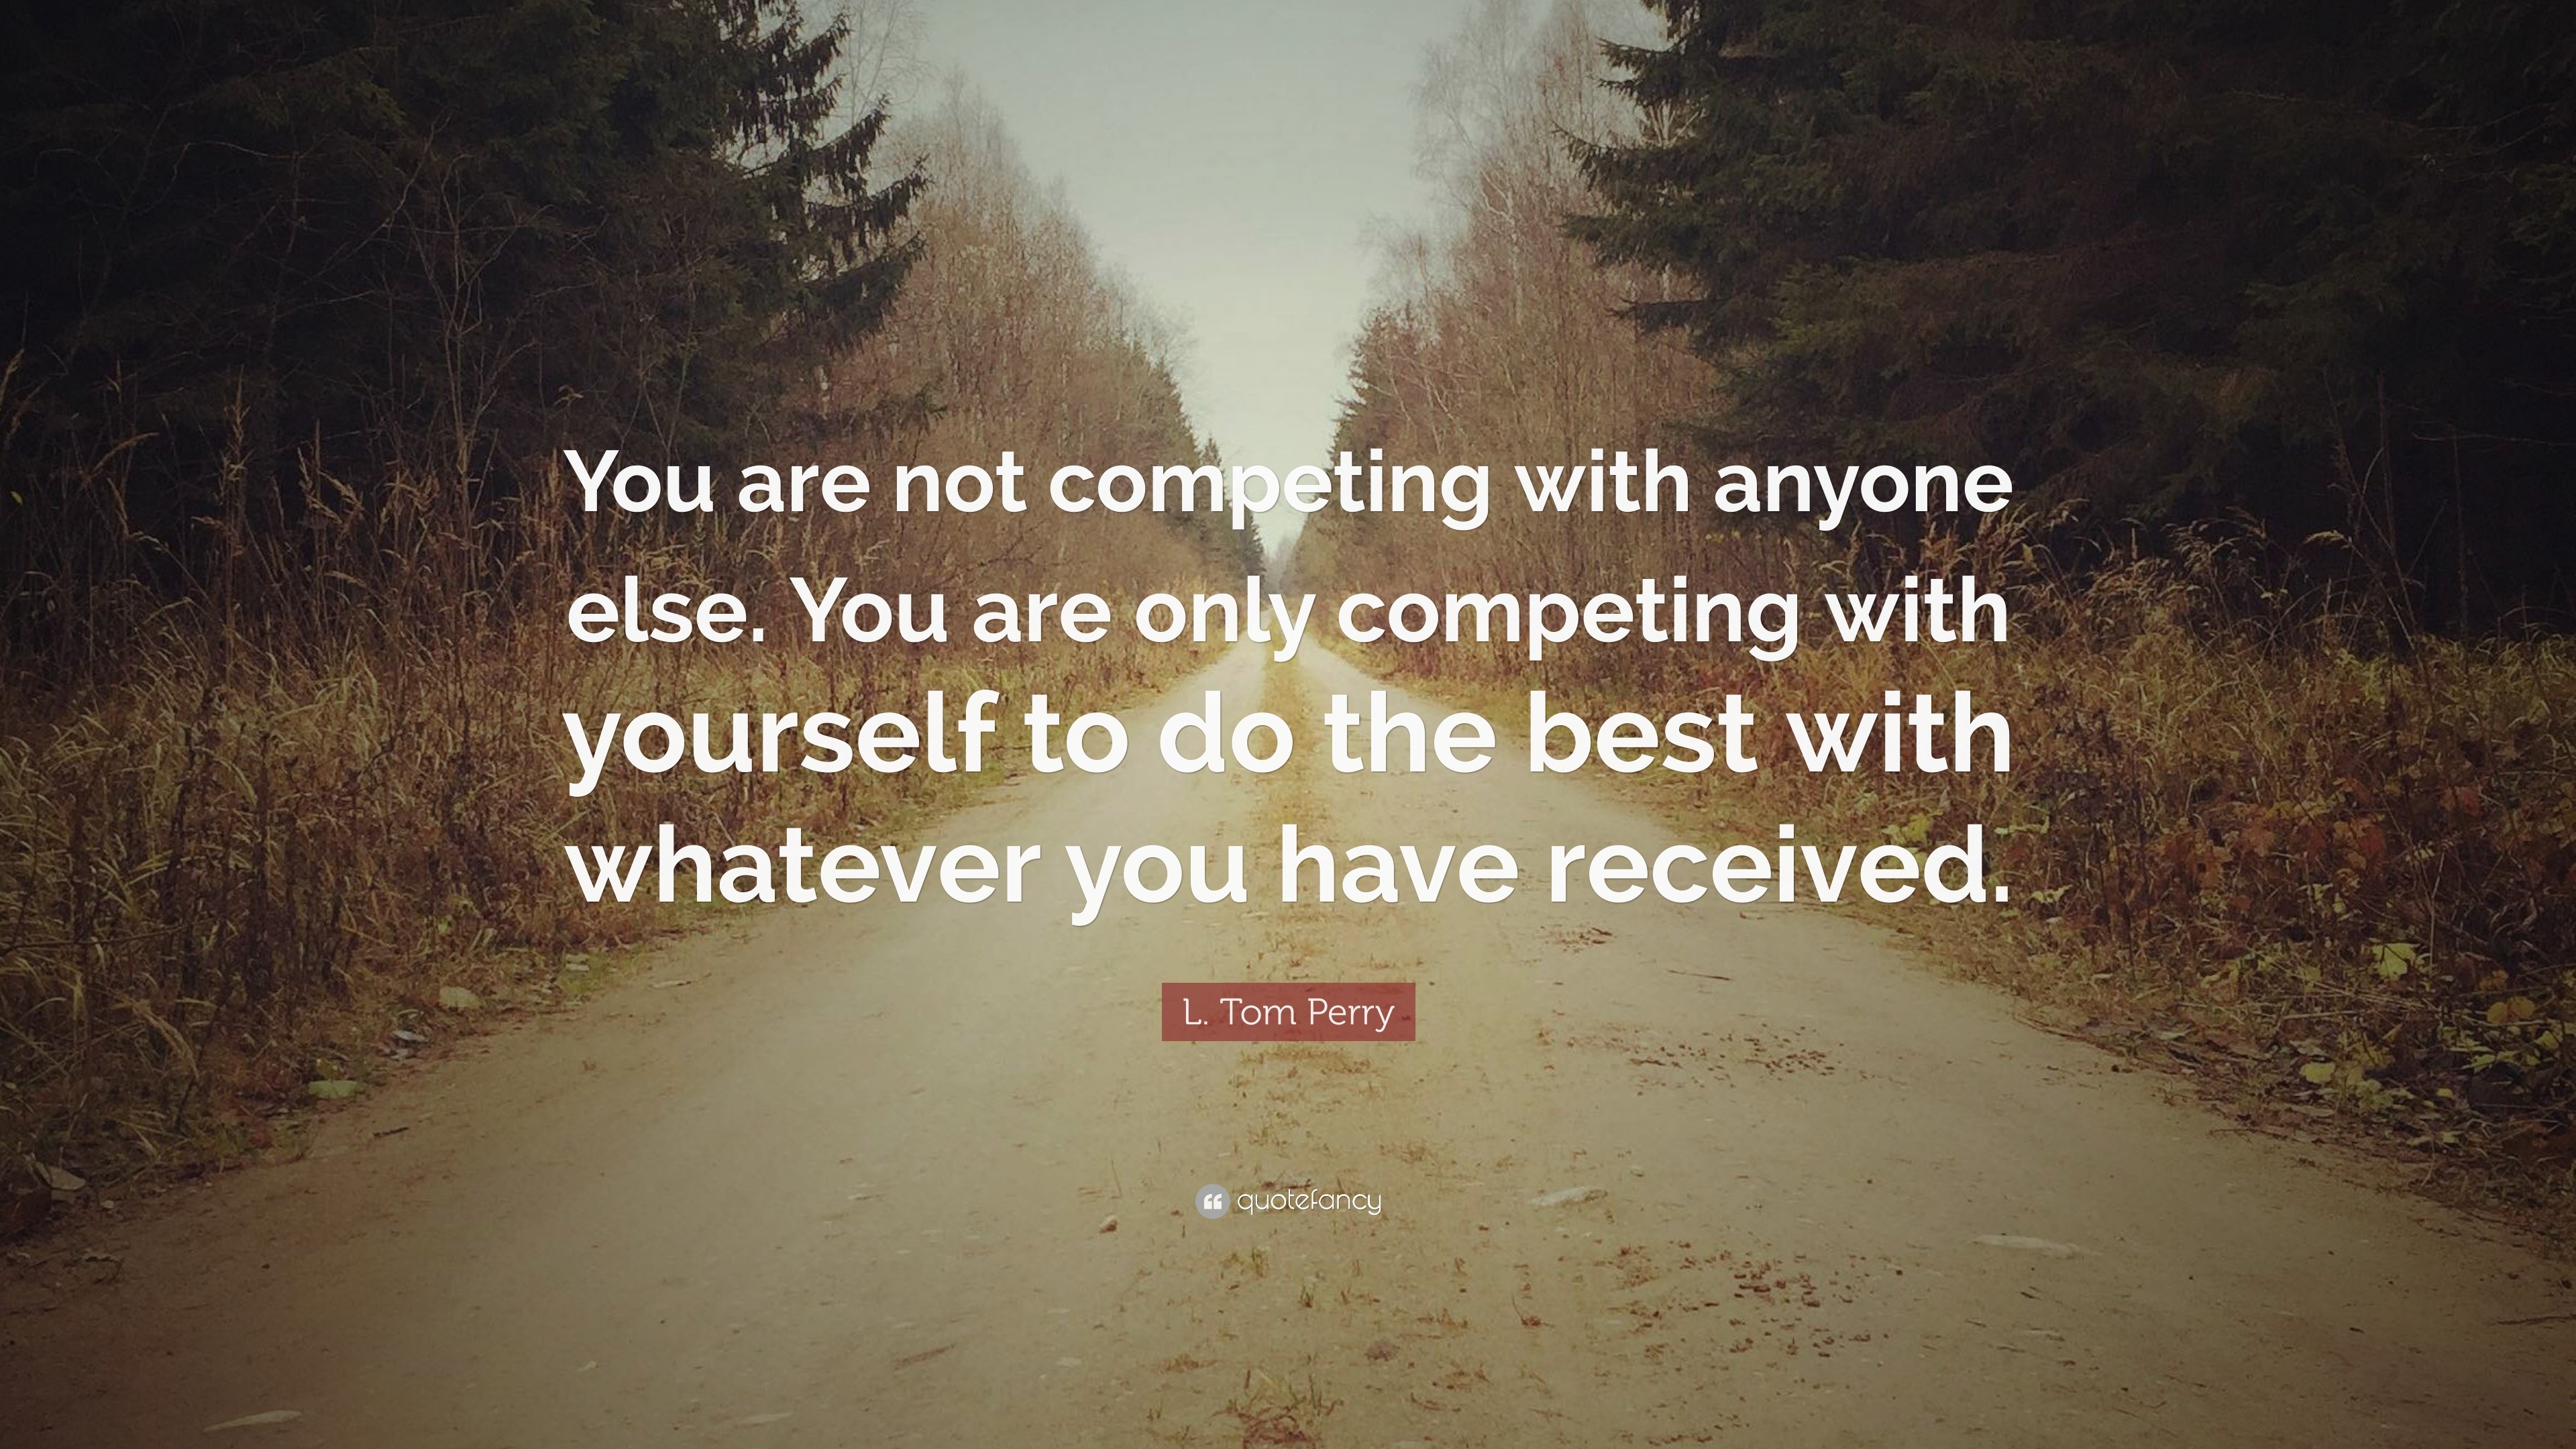 L. Tom Perry Quote: “You are not competing with anyone else. You are ...